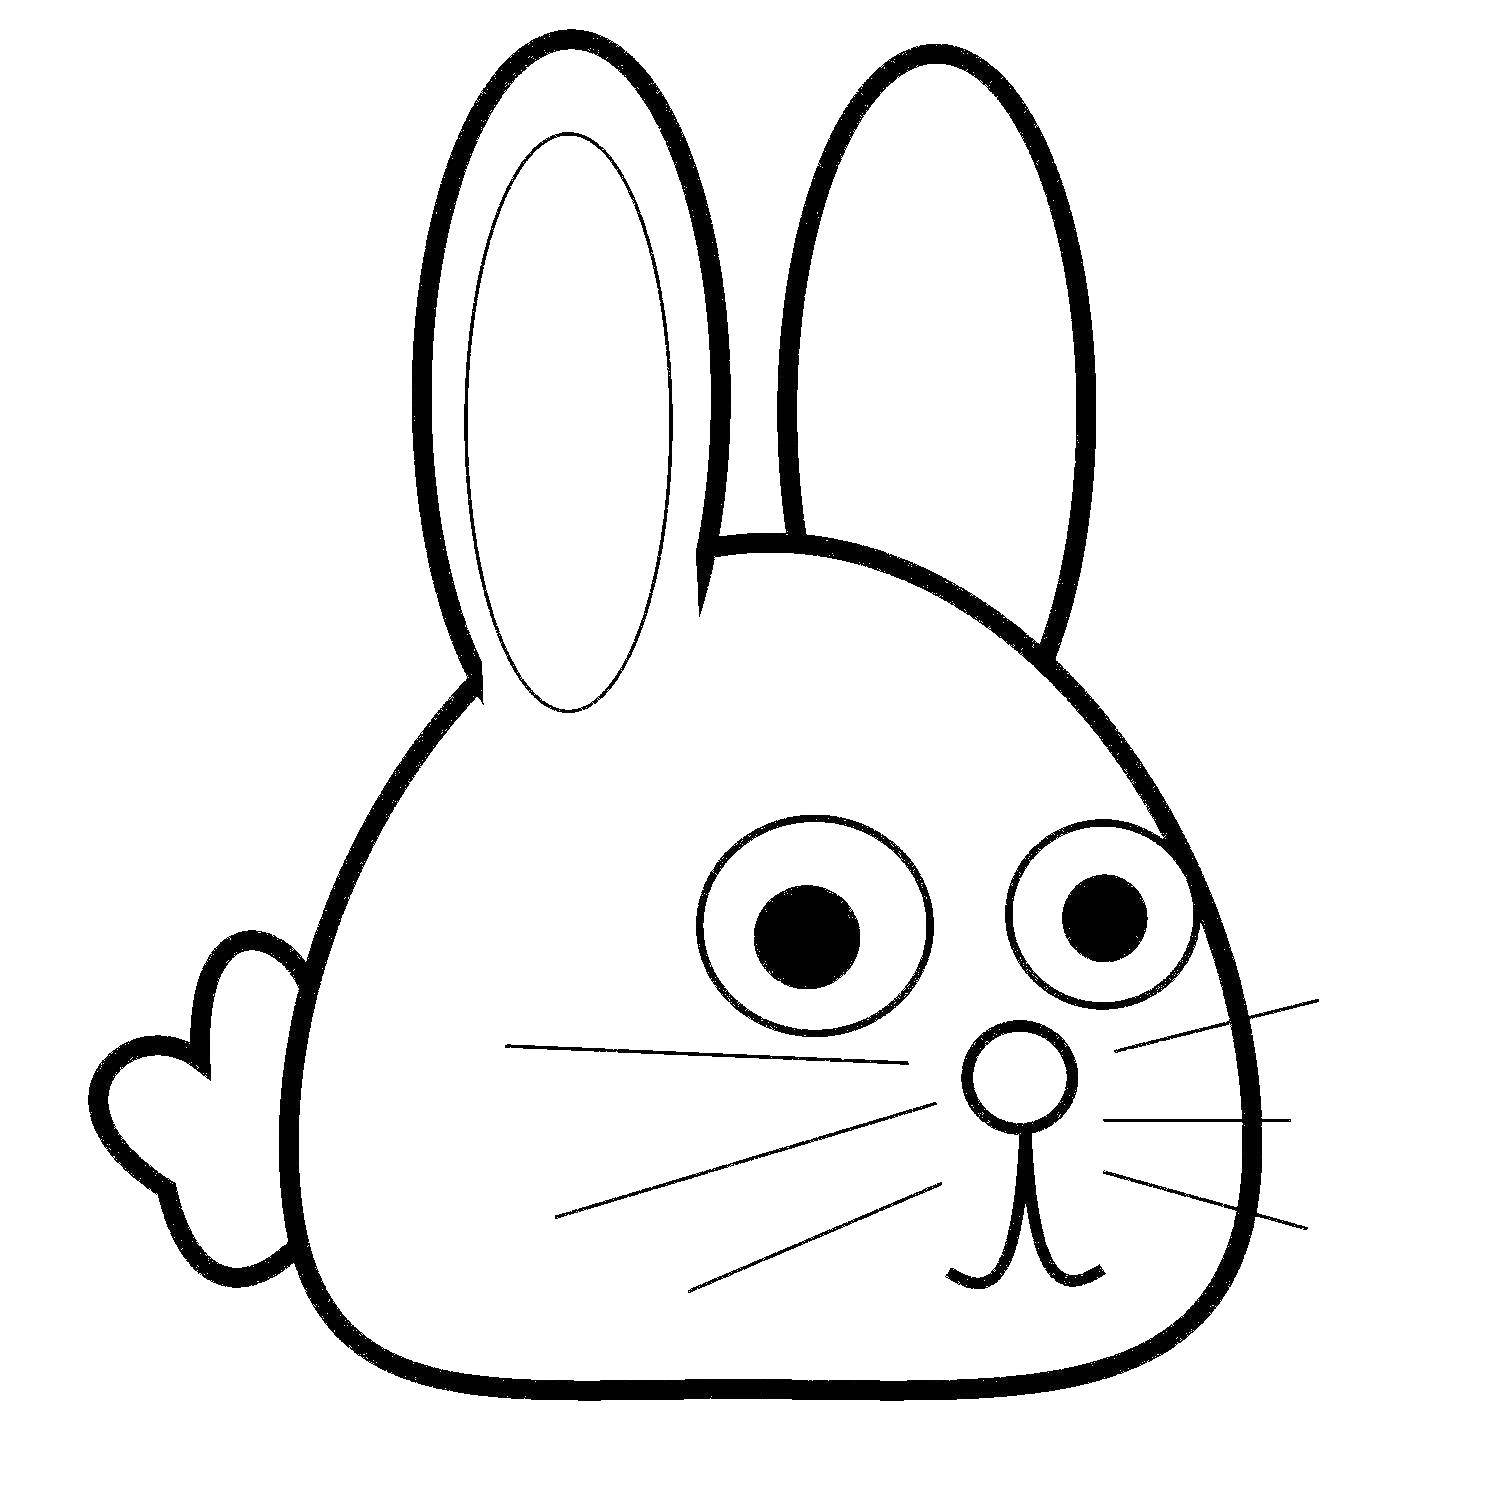 Coloring Rabbit head. Category the rabbit. Tags:  rabbit, hare.